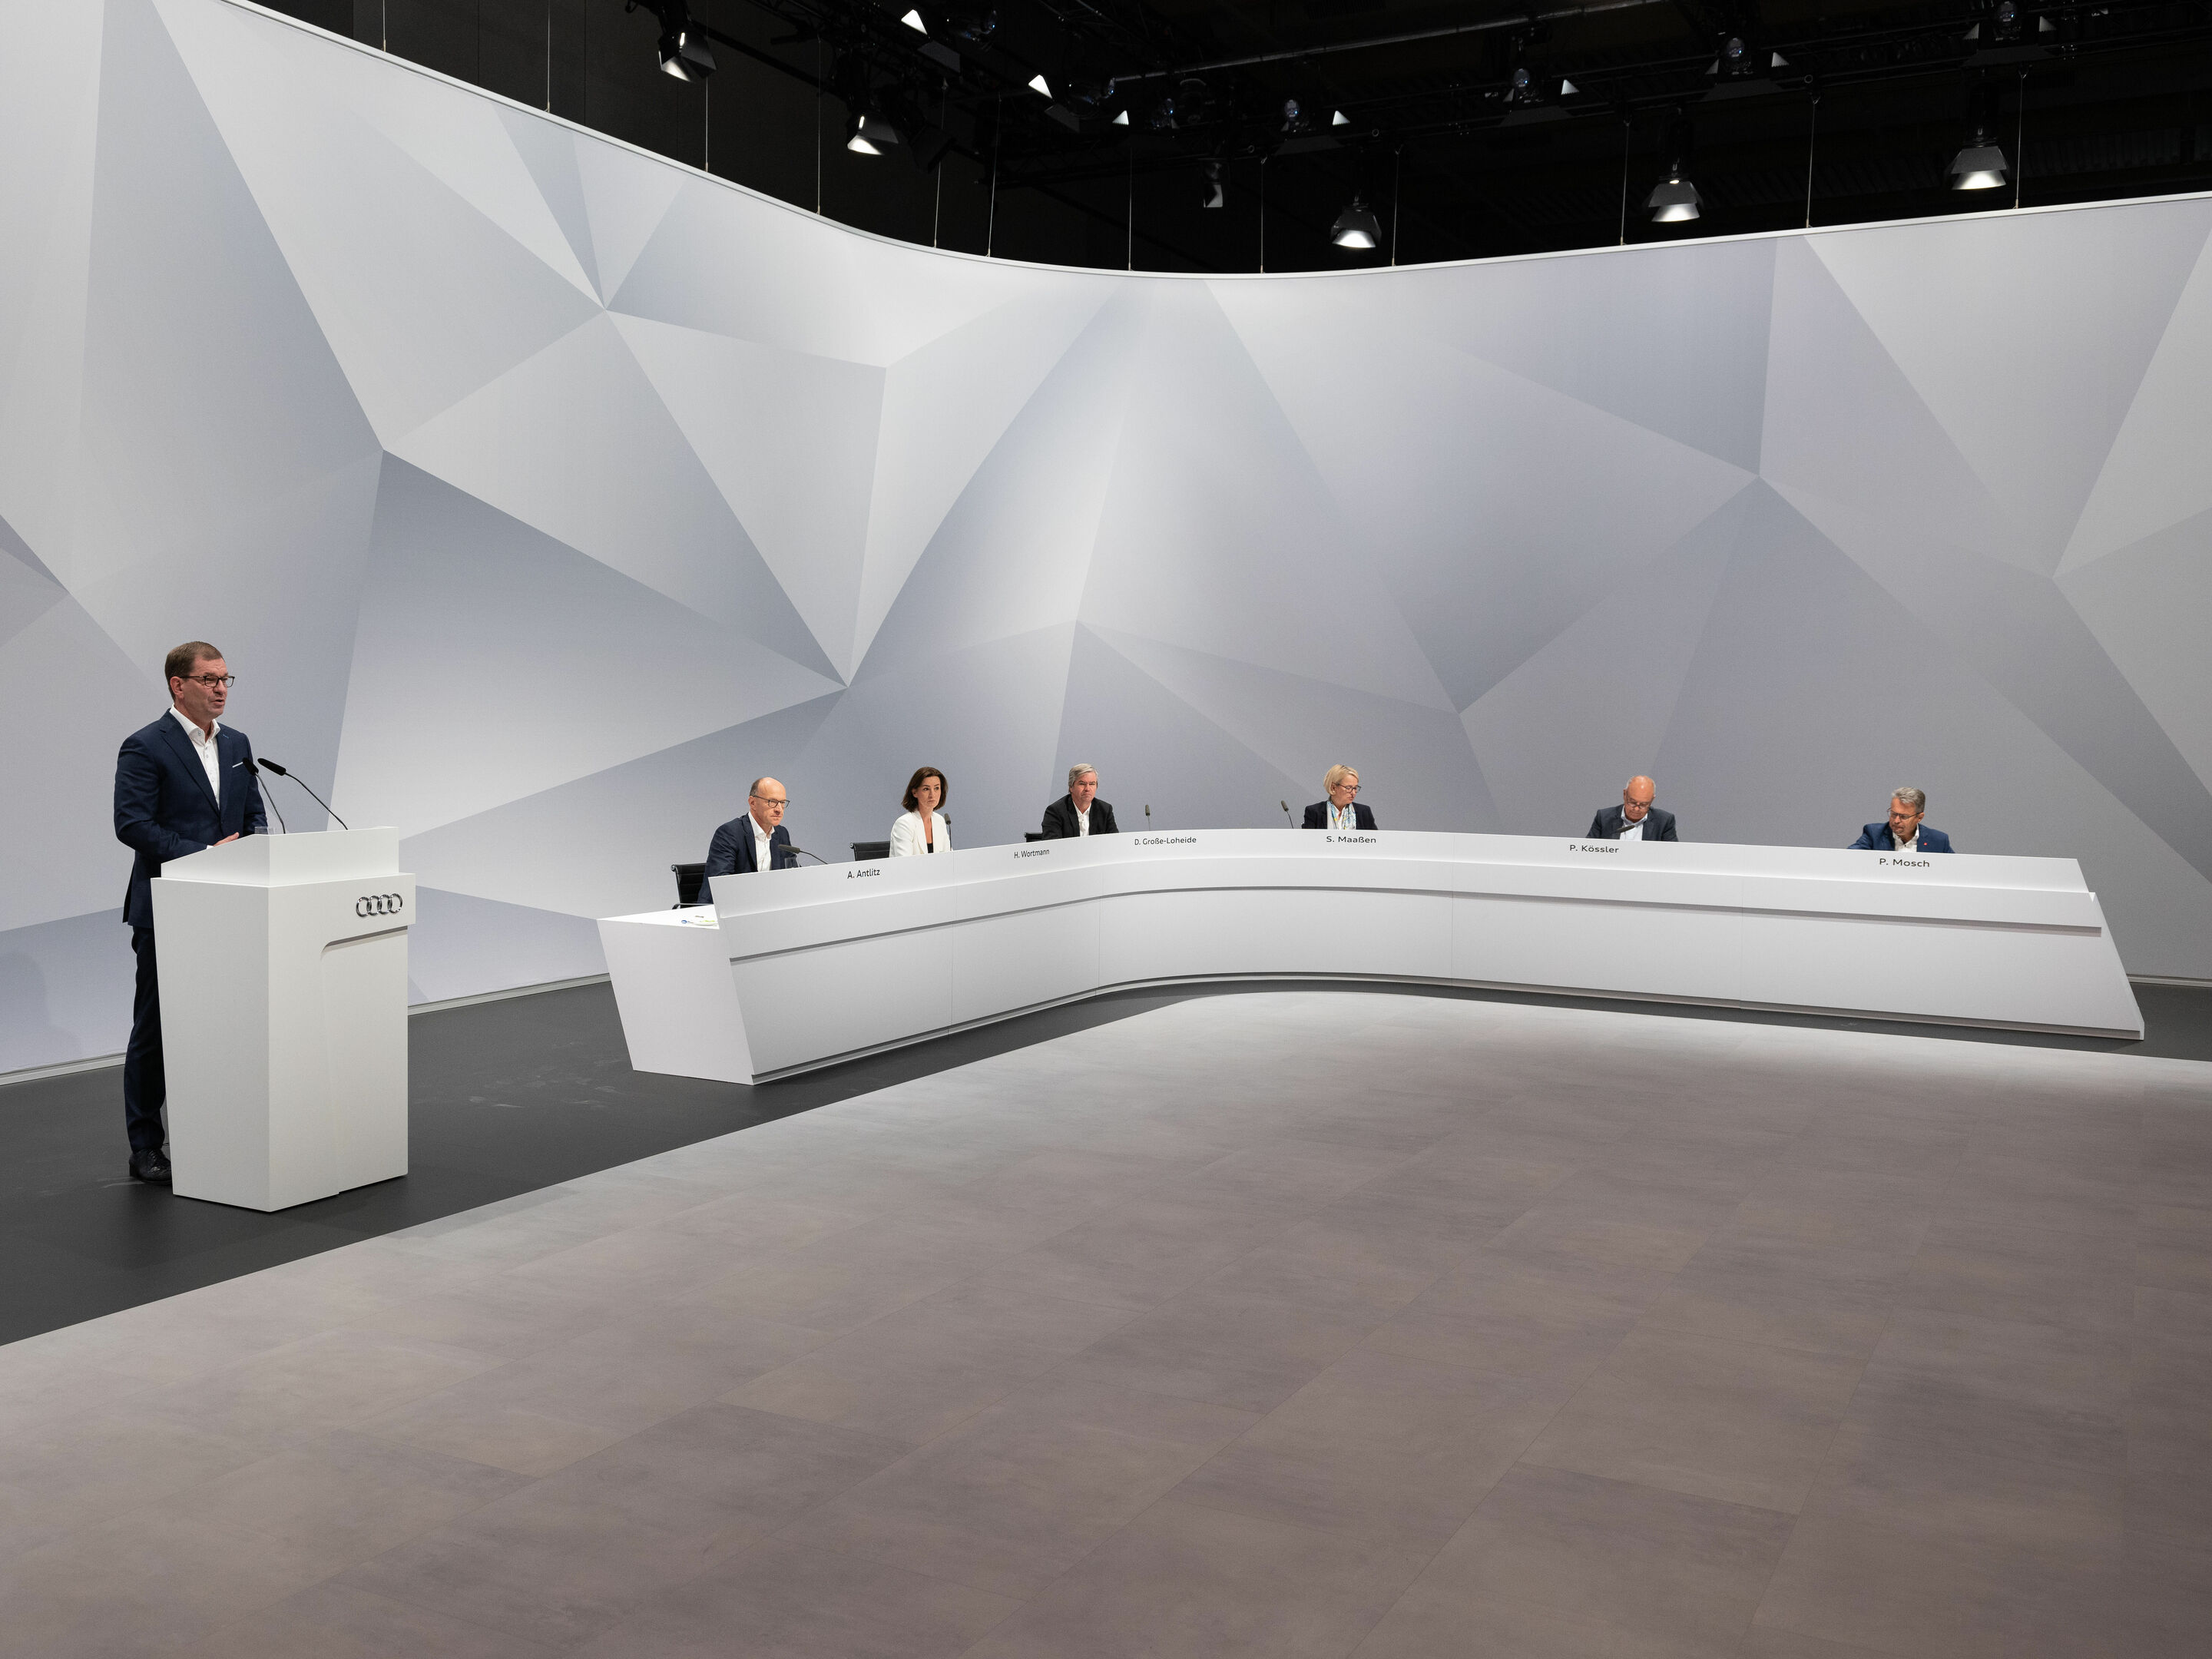 131st Annual General Meeting of AUDI AG